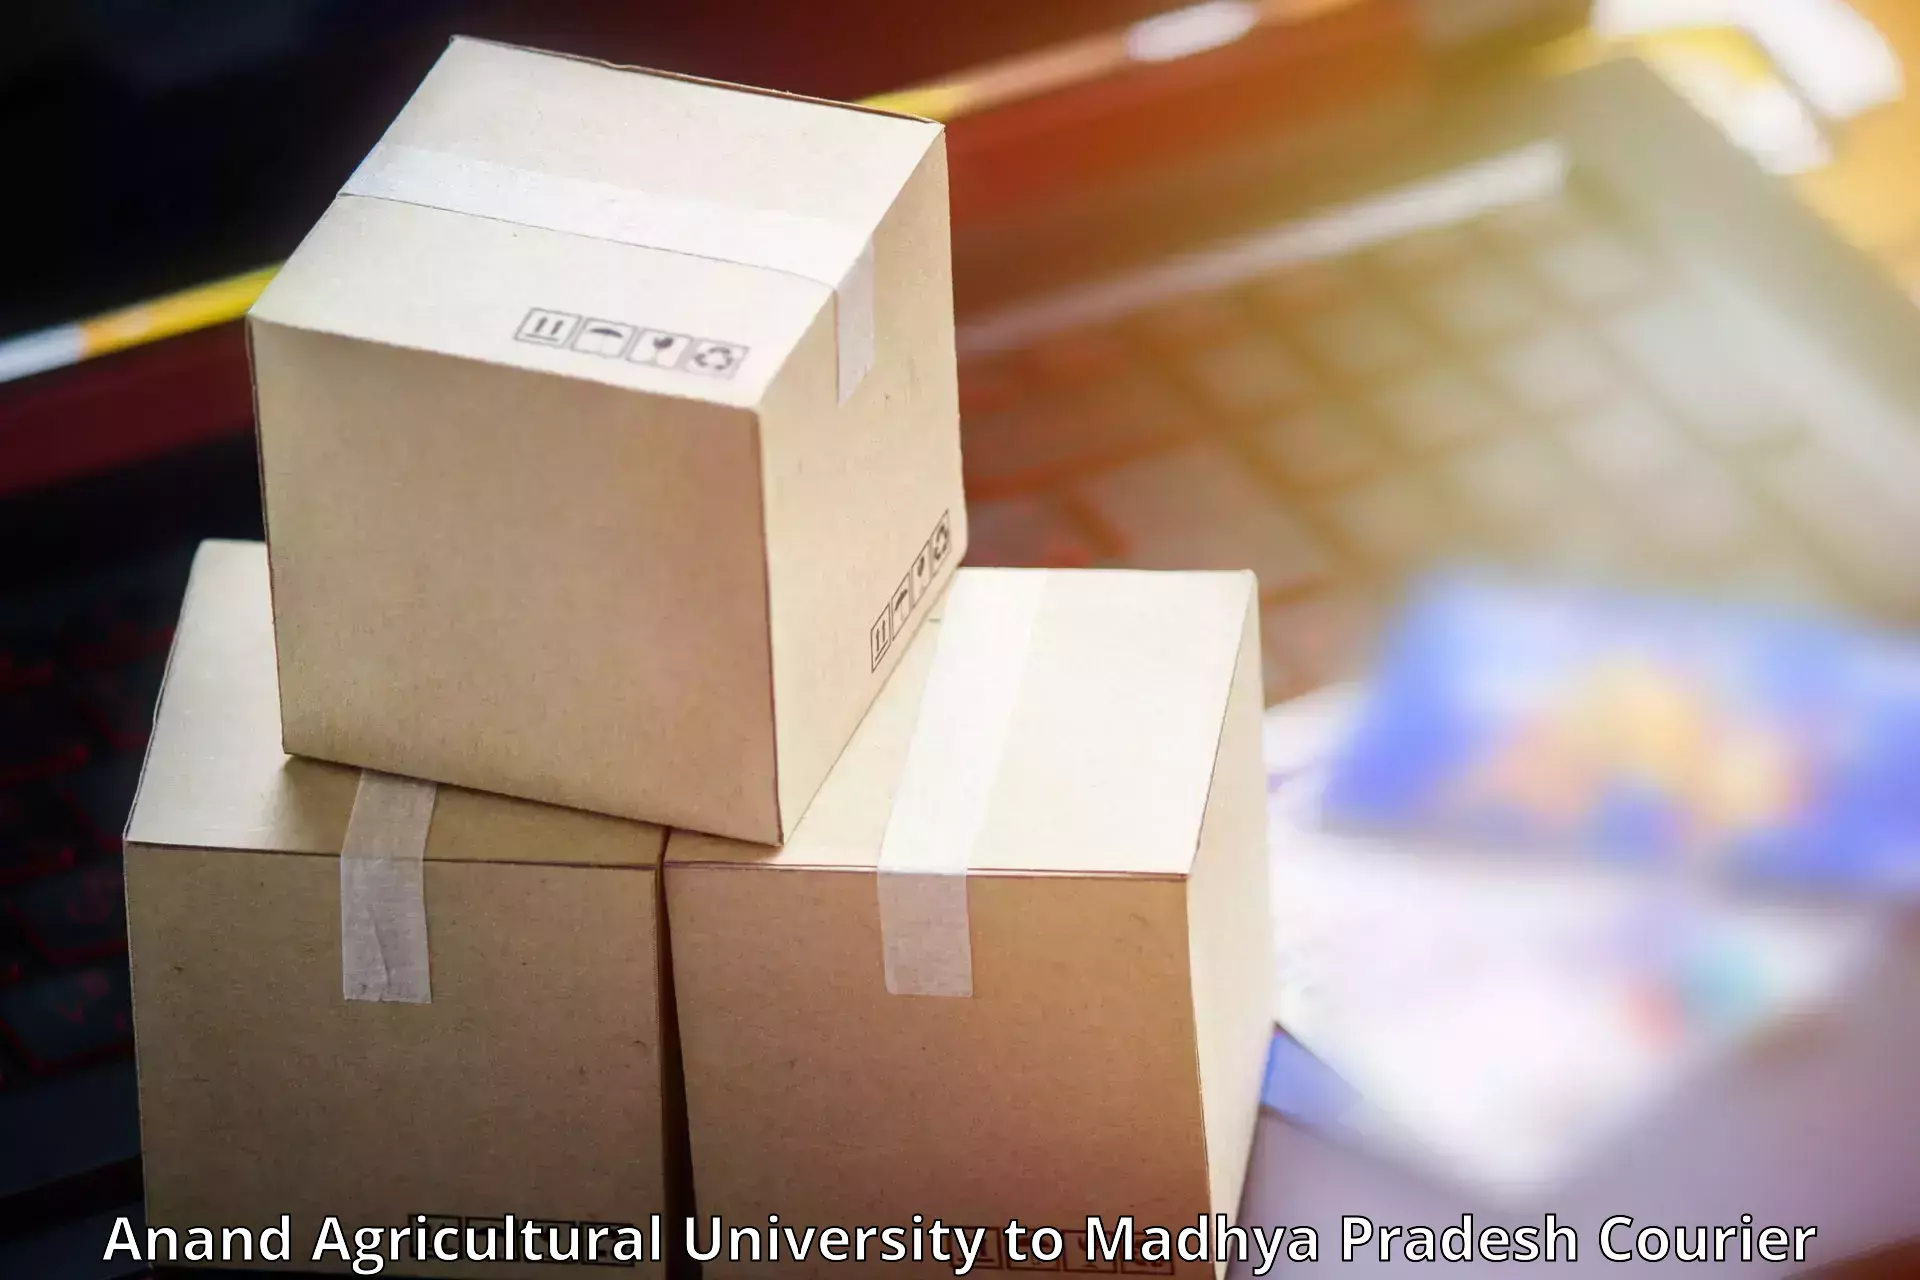 Personal courier services Anand Agricultural University to Sehore